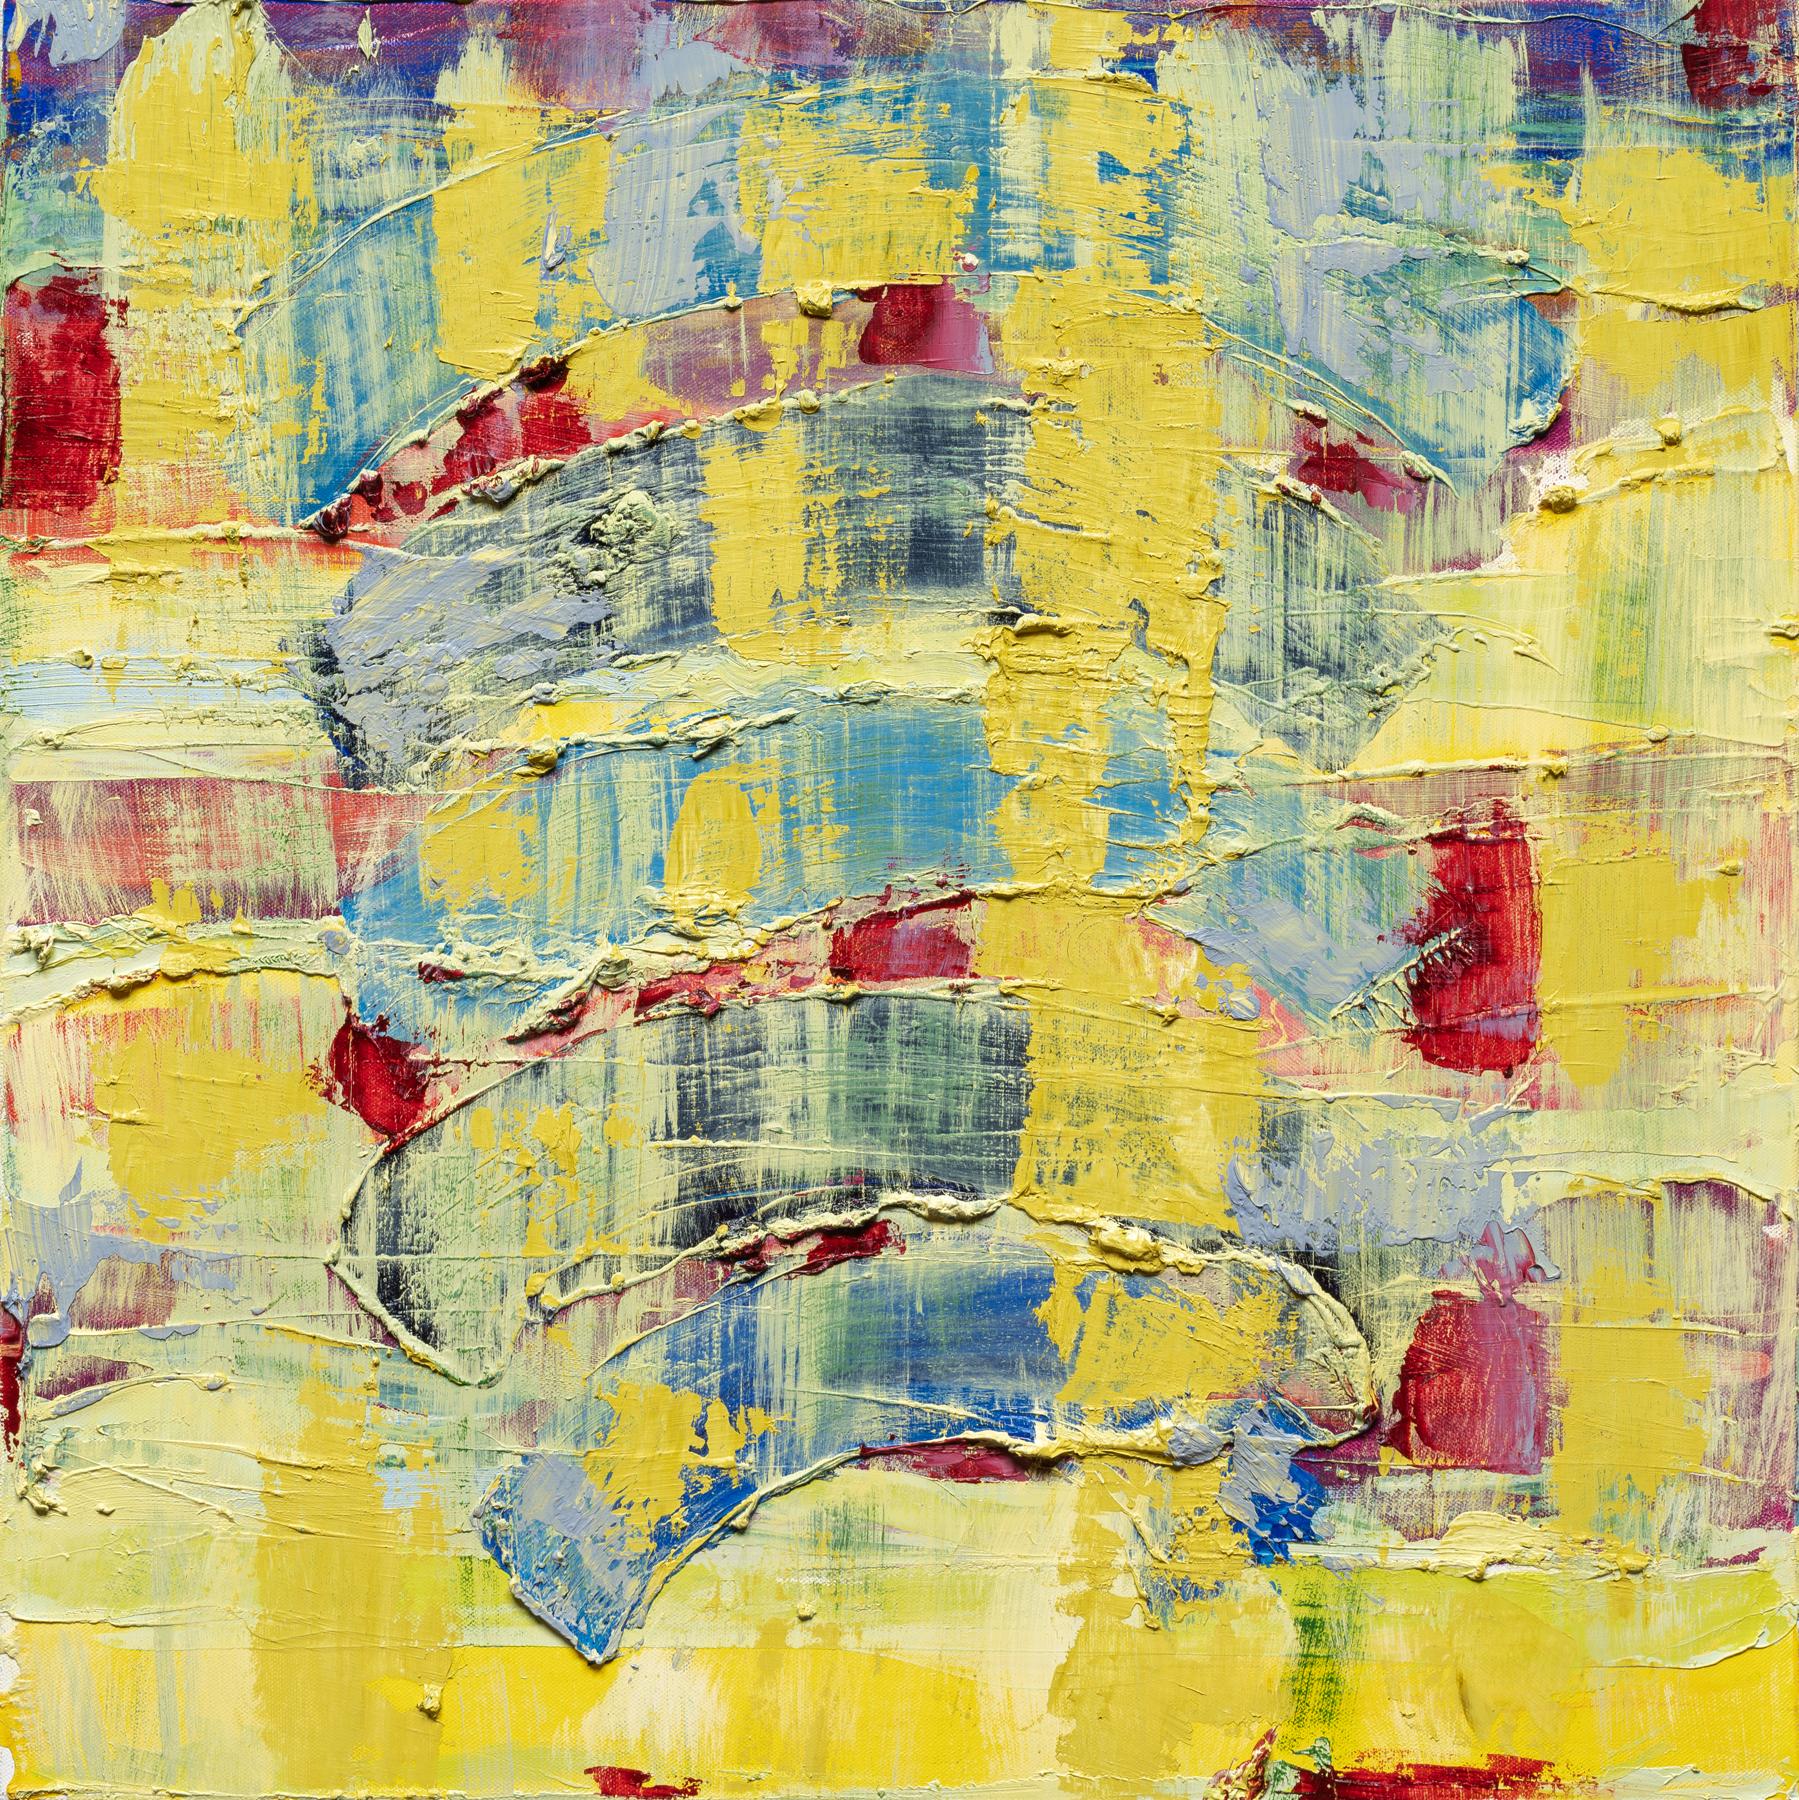 Dennis Alter Figurative Painting - Through the Looking Glass -- contemporary abstract oil painting in yellow & blue